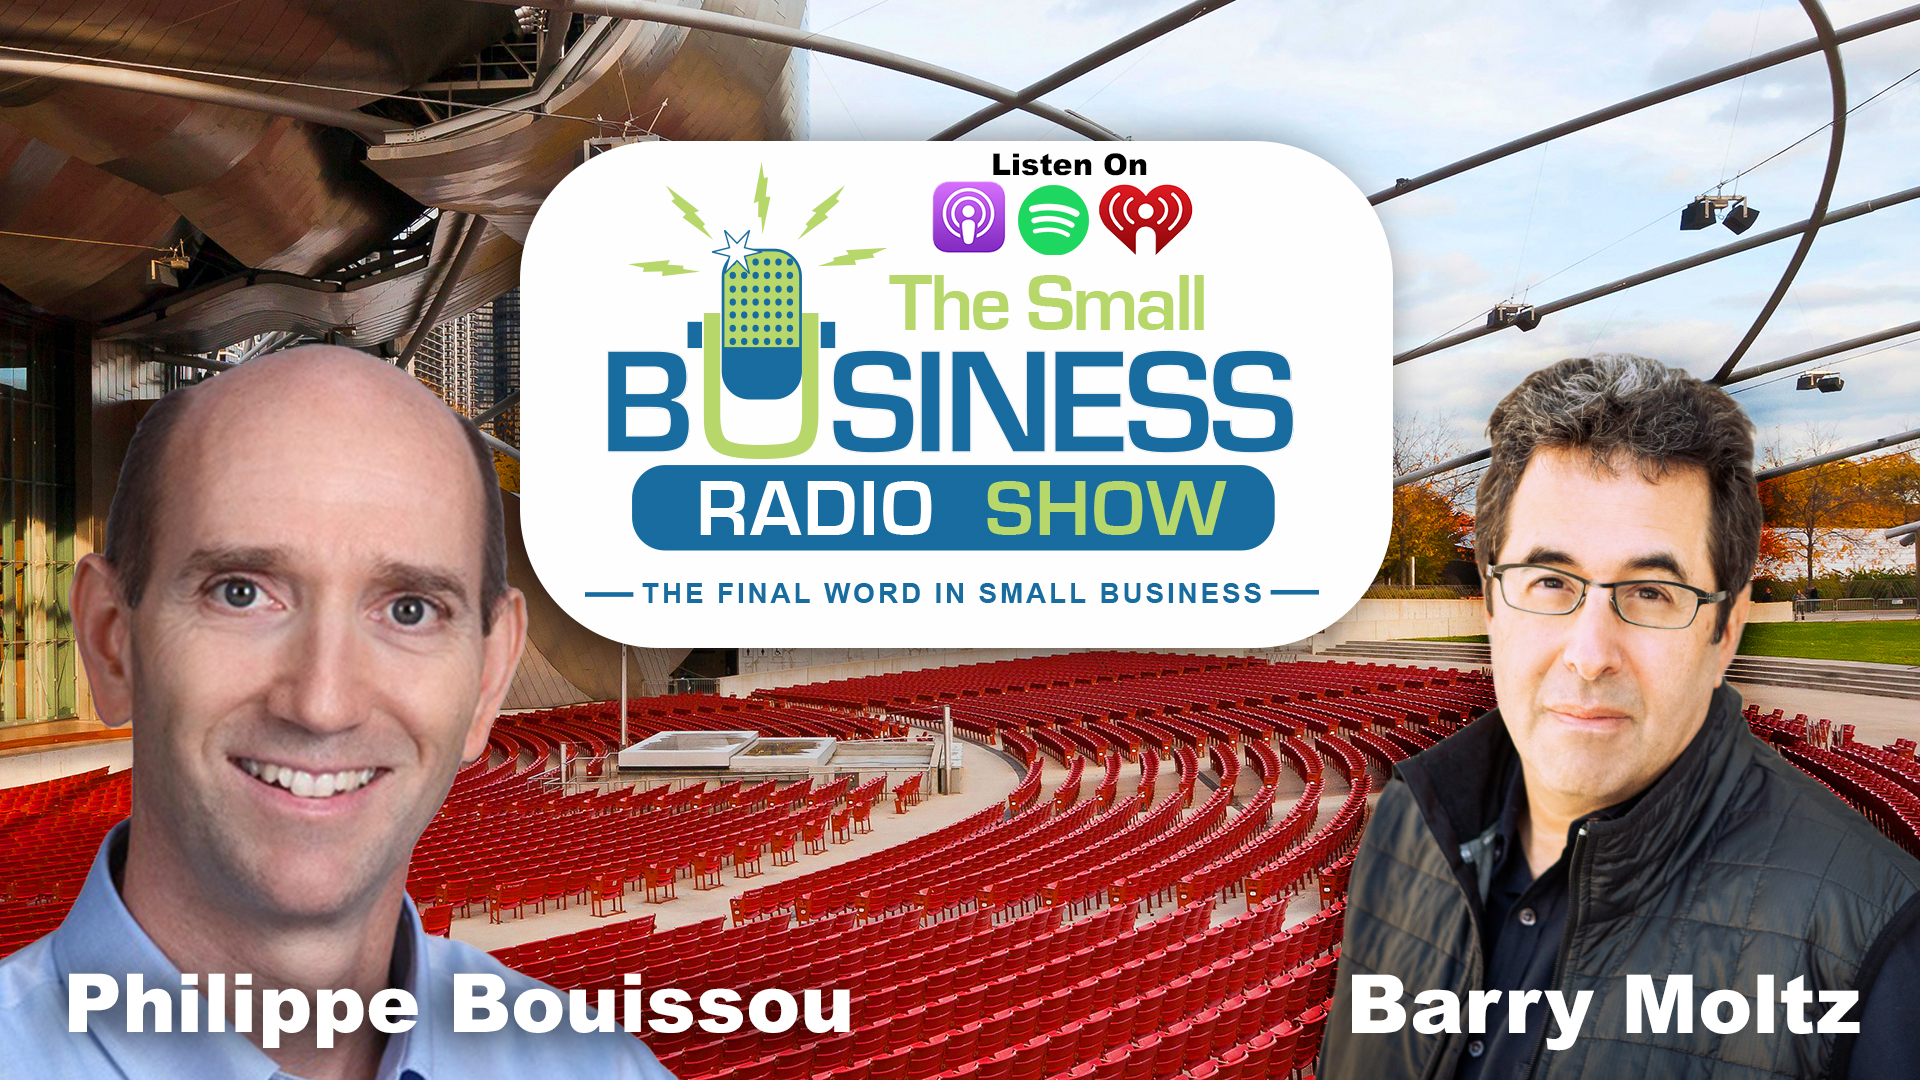 Philippe Bouissou on The Small Business Radio Show